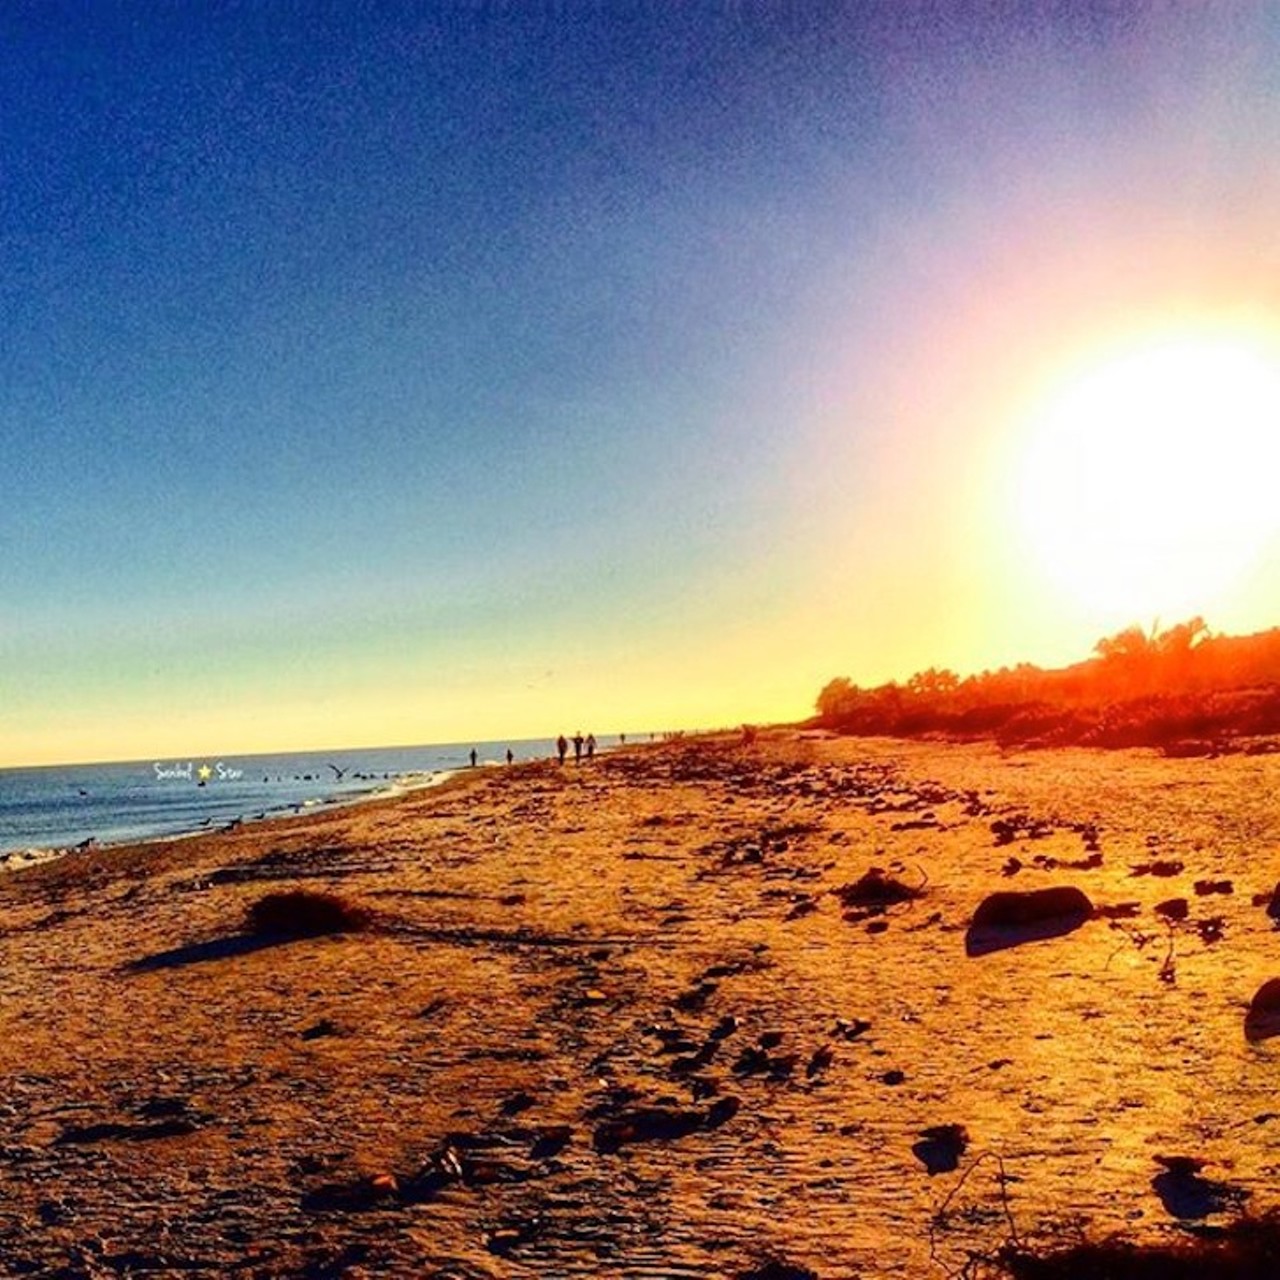 Captiva Island
Get ready to get captivated by Captiva Island. The bright white sand will have you walking for days, but the real draw here is the breathtaking sunset. Captiva Island is well-known for its shelling, so get clean out the shell bucket, explorers.
Photo via sanibelstar/Instagram